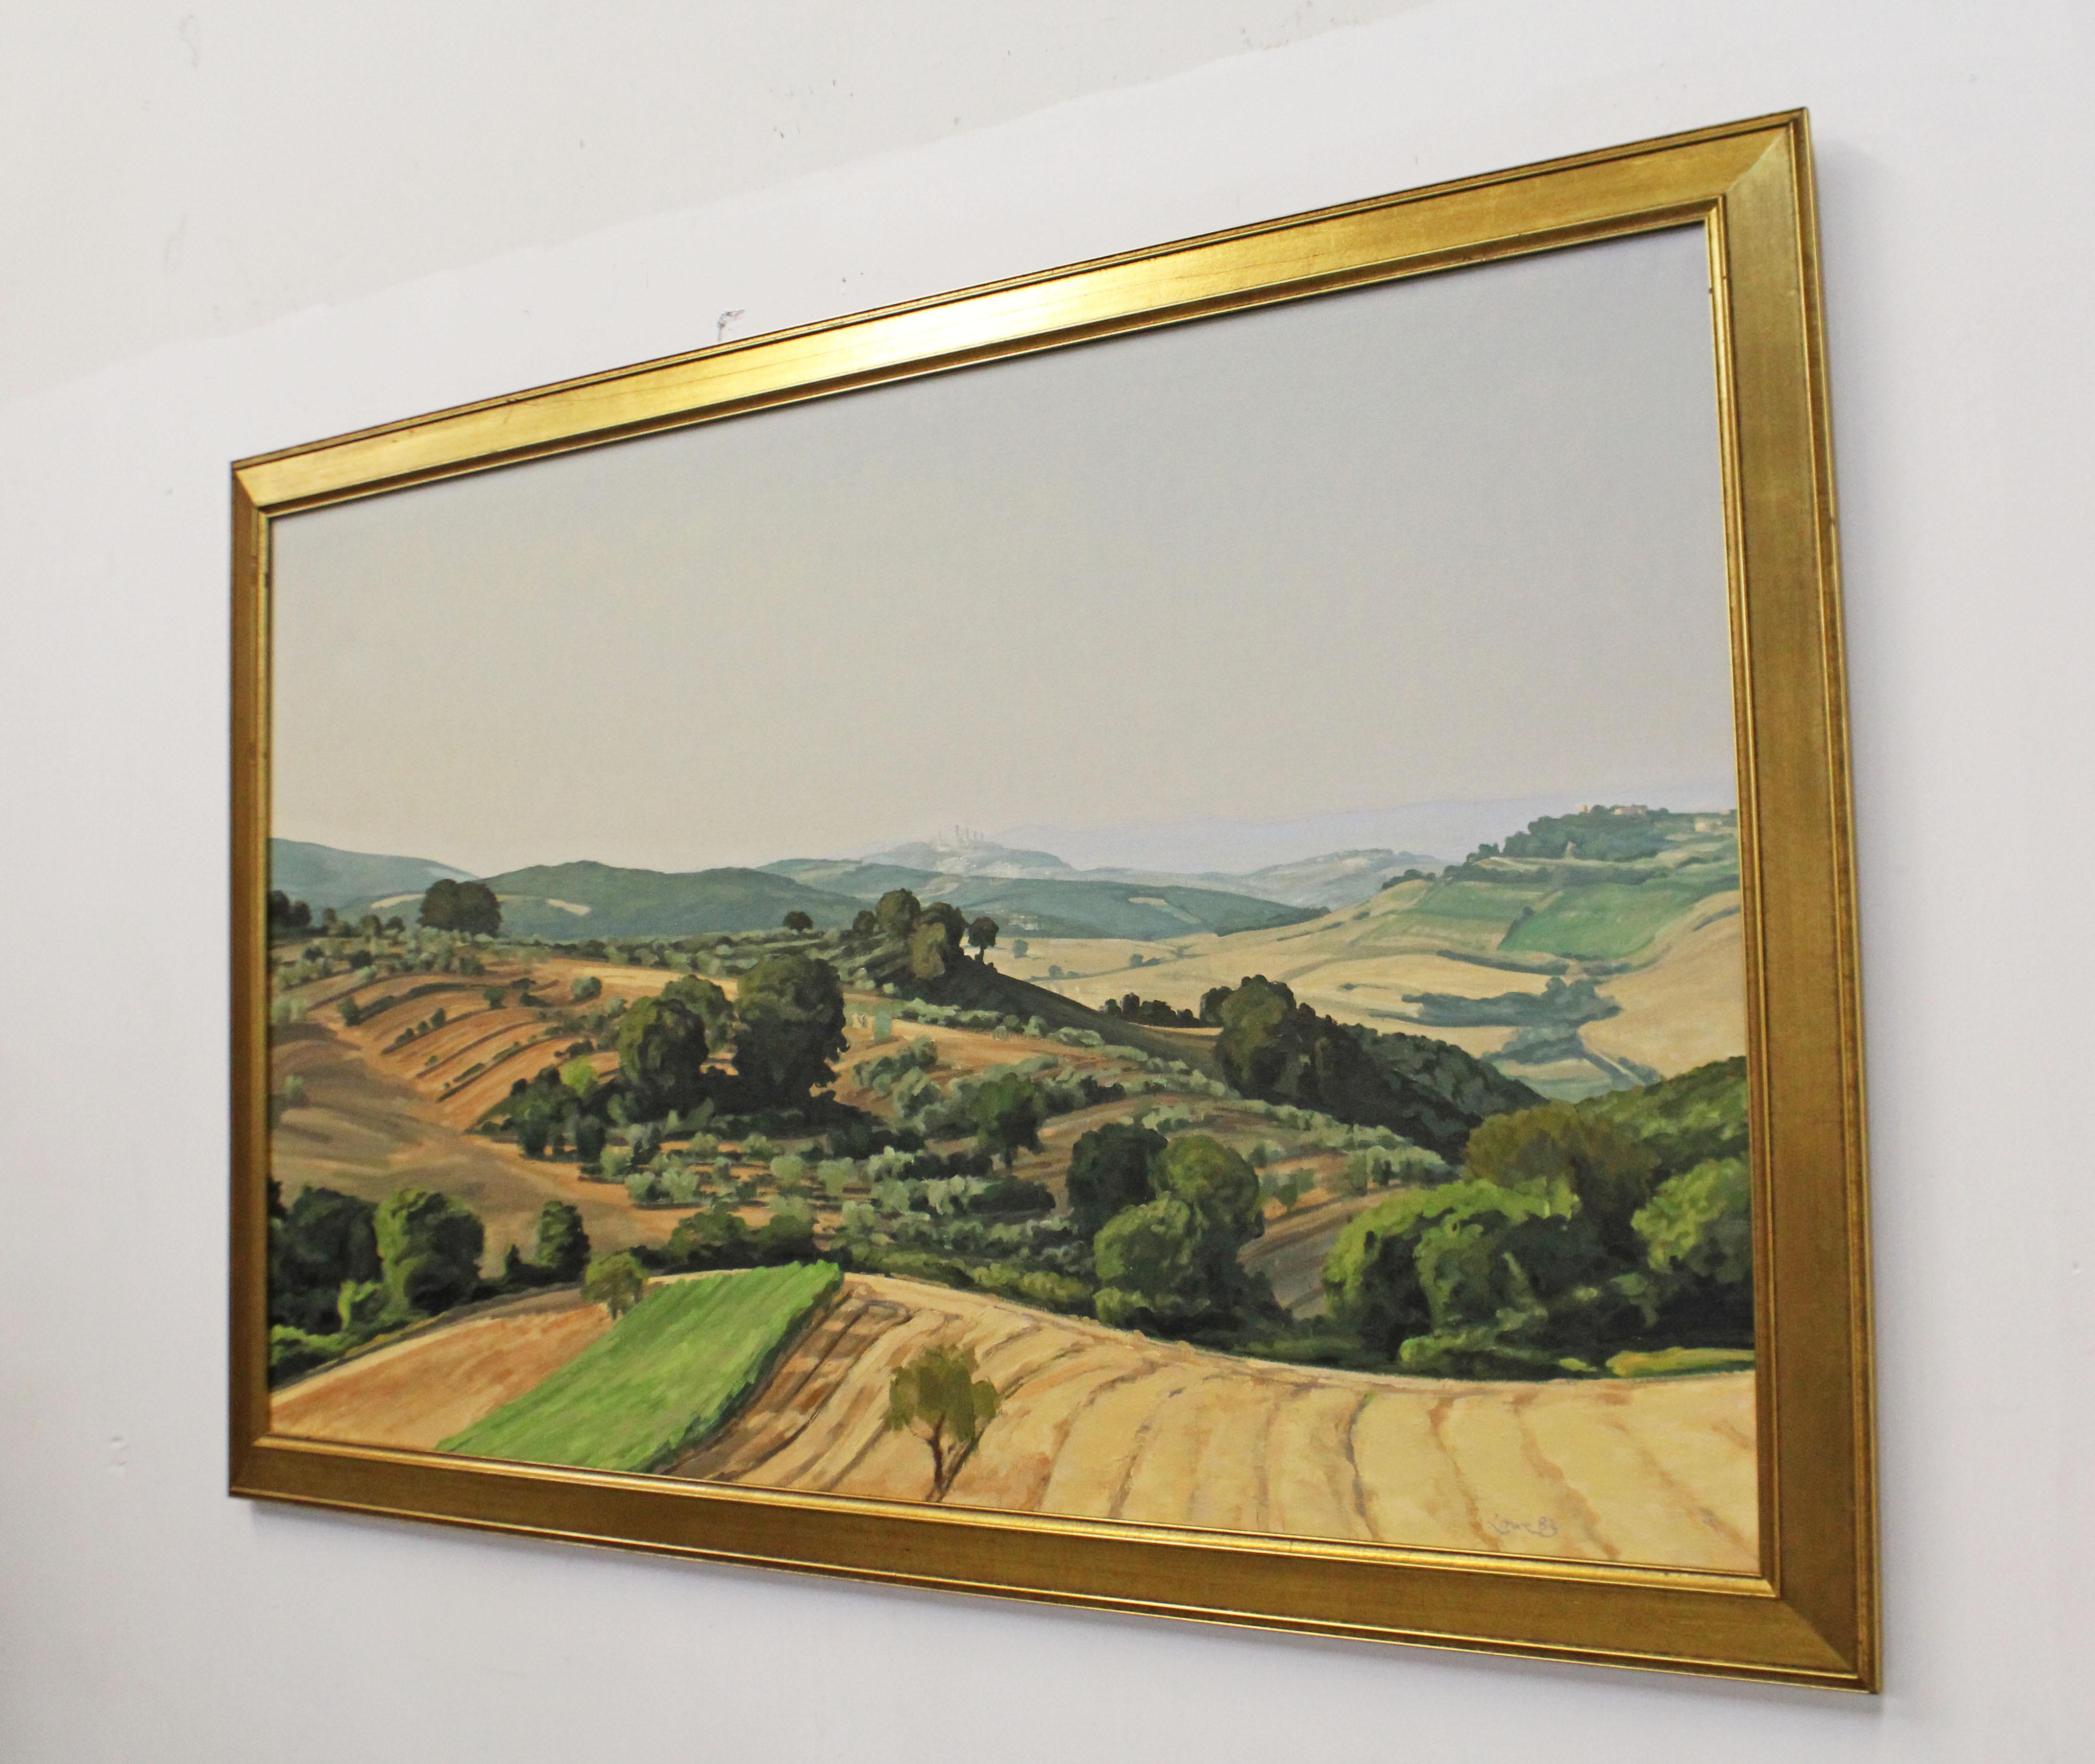 Offered is a vintage framed oil painting on canvas entitled 'Distant View of San Gimignano', signed 'Lowe, 83'. Features a gorgeous landscape view of the San Gimignano country side with a distant view of the Piazza della Cisterna. Includes a gold